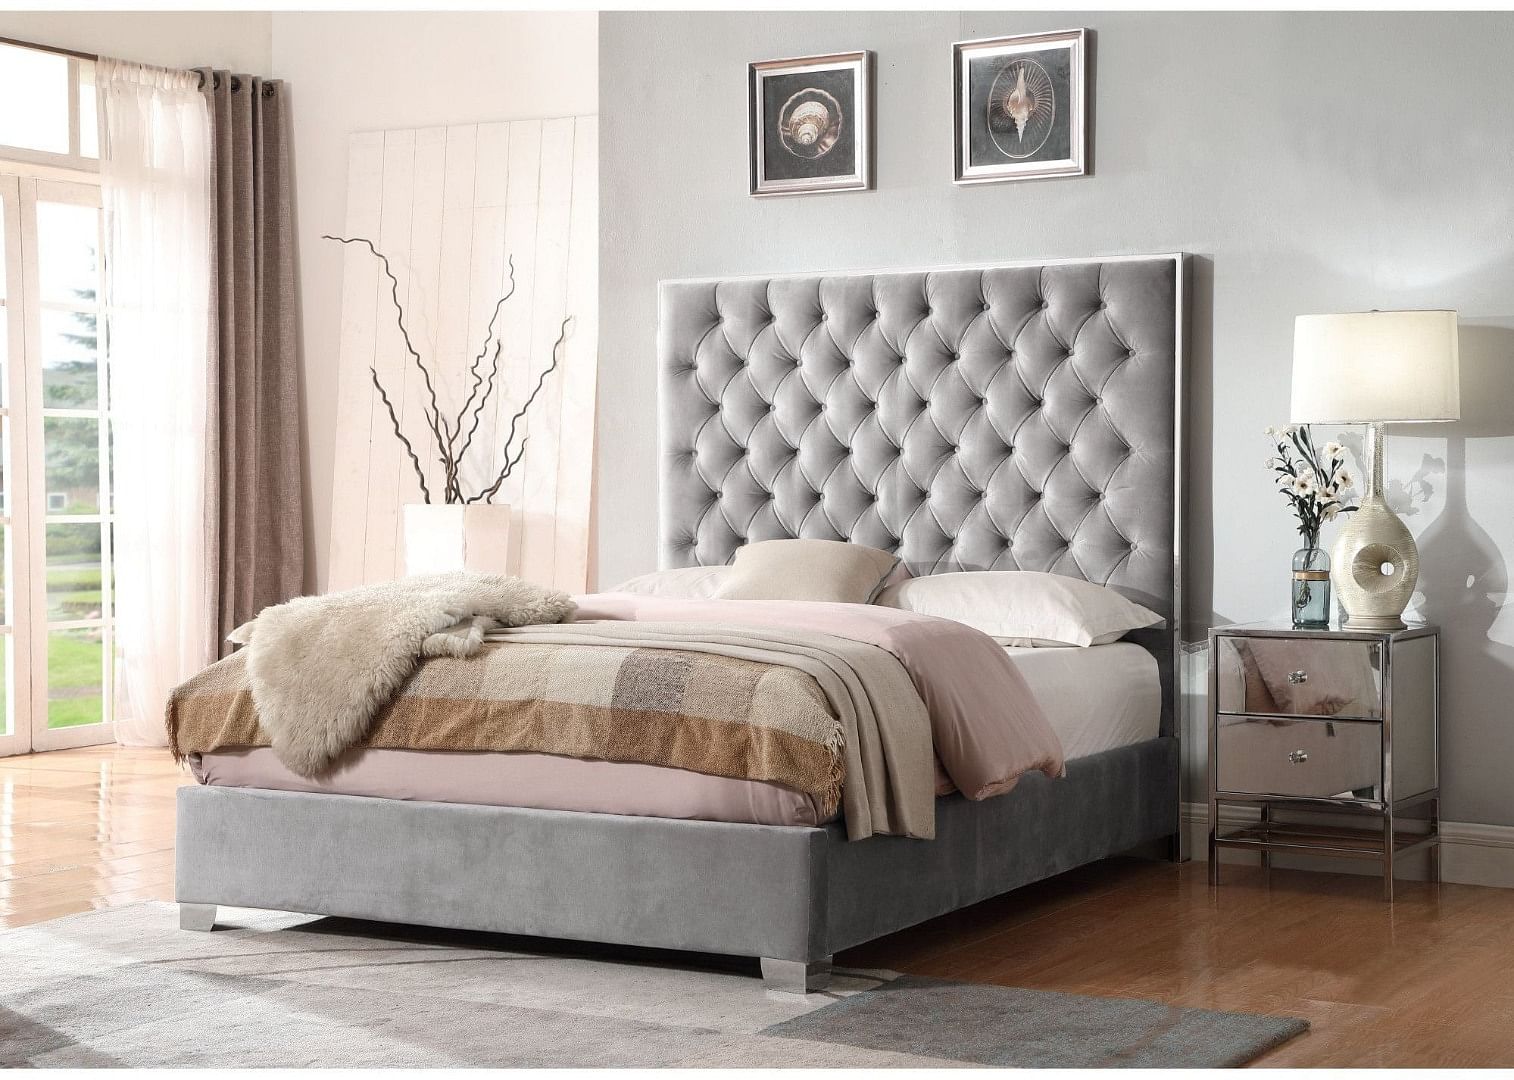 Lacey Upholstered Queen Bed